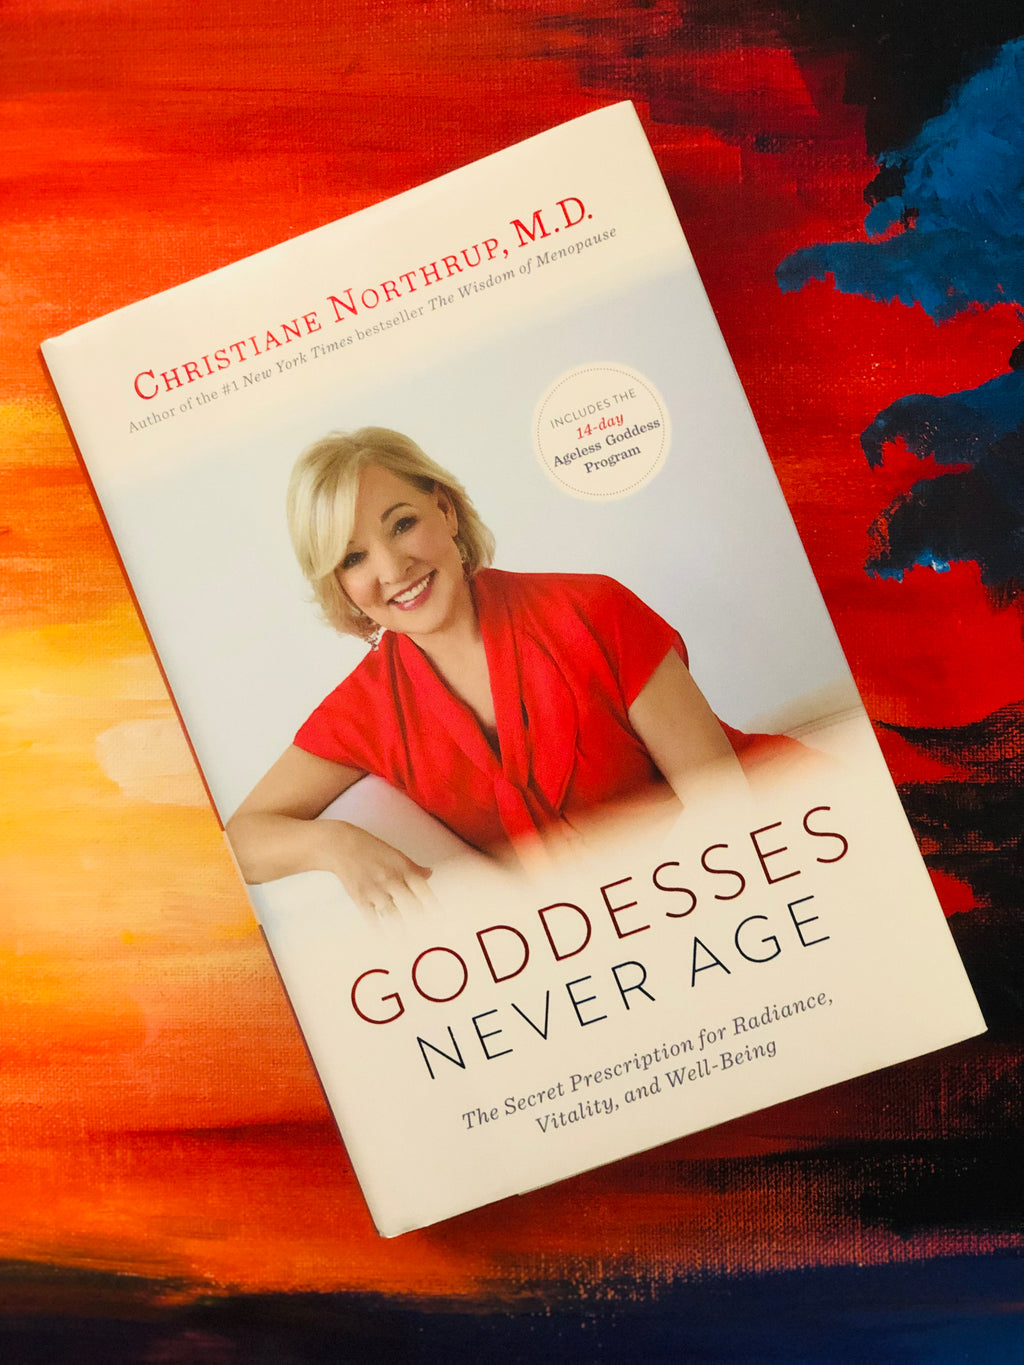 Goddesses Never Age- By Christiane Northrup, M.D.